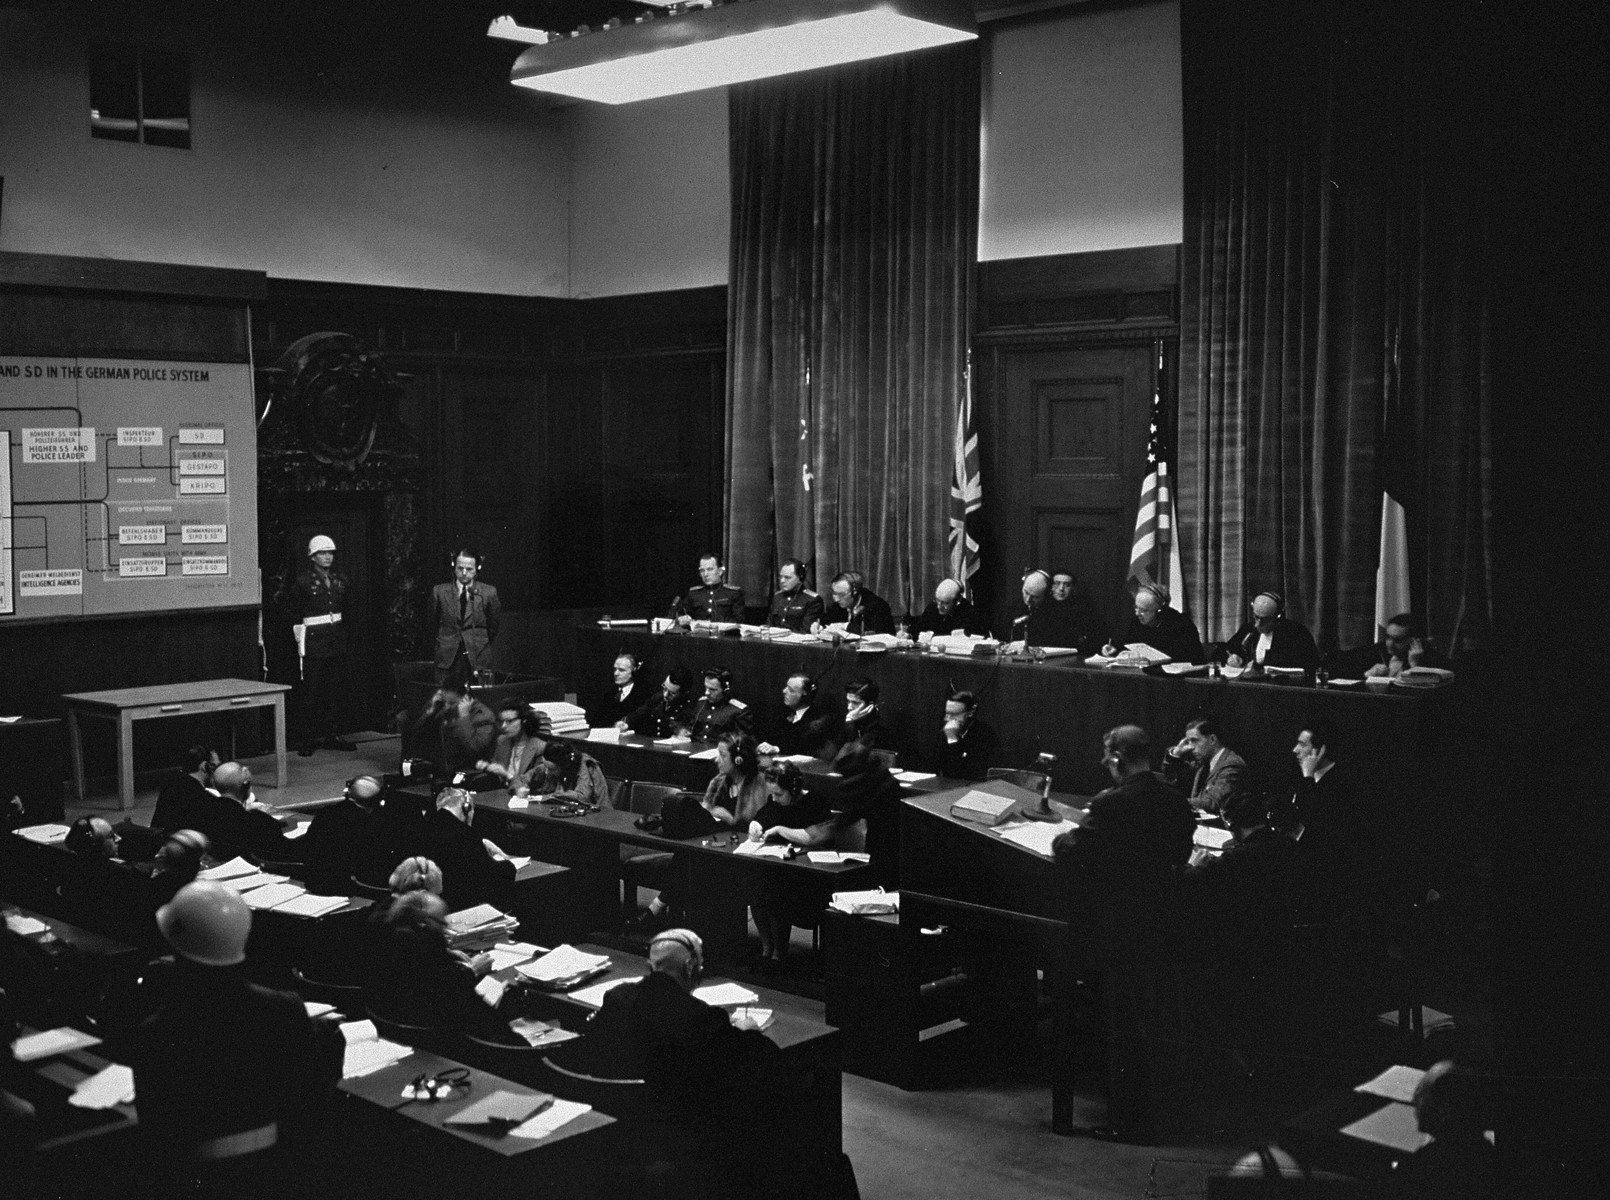 The International Military Tribunal hears evidence on defendant Ernst Kaltenbrunner, the SD, and the German police system at the war crimes trial in Nuremberg.